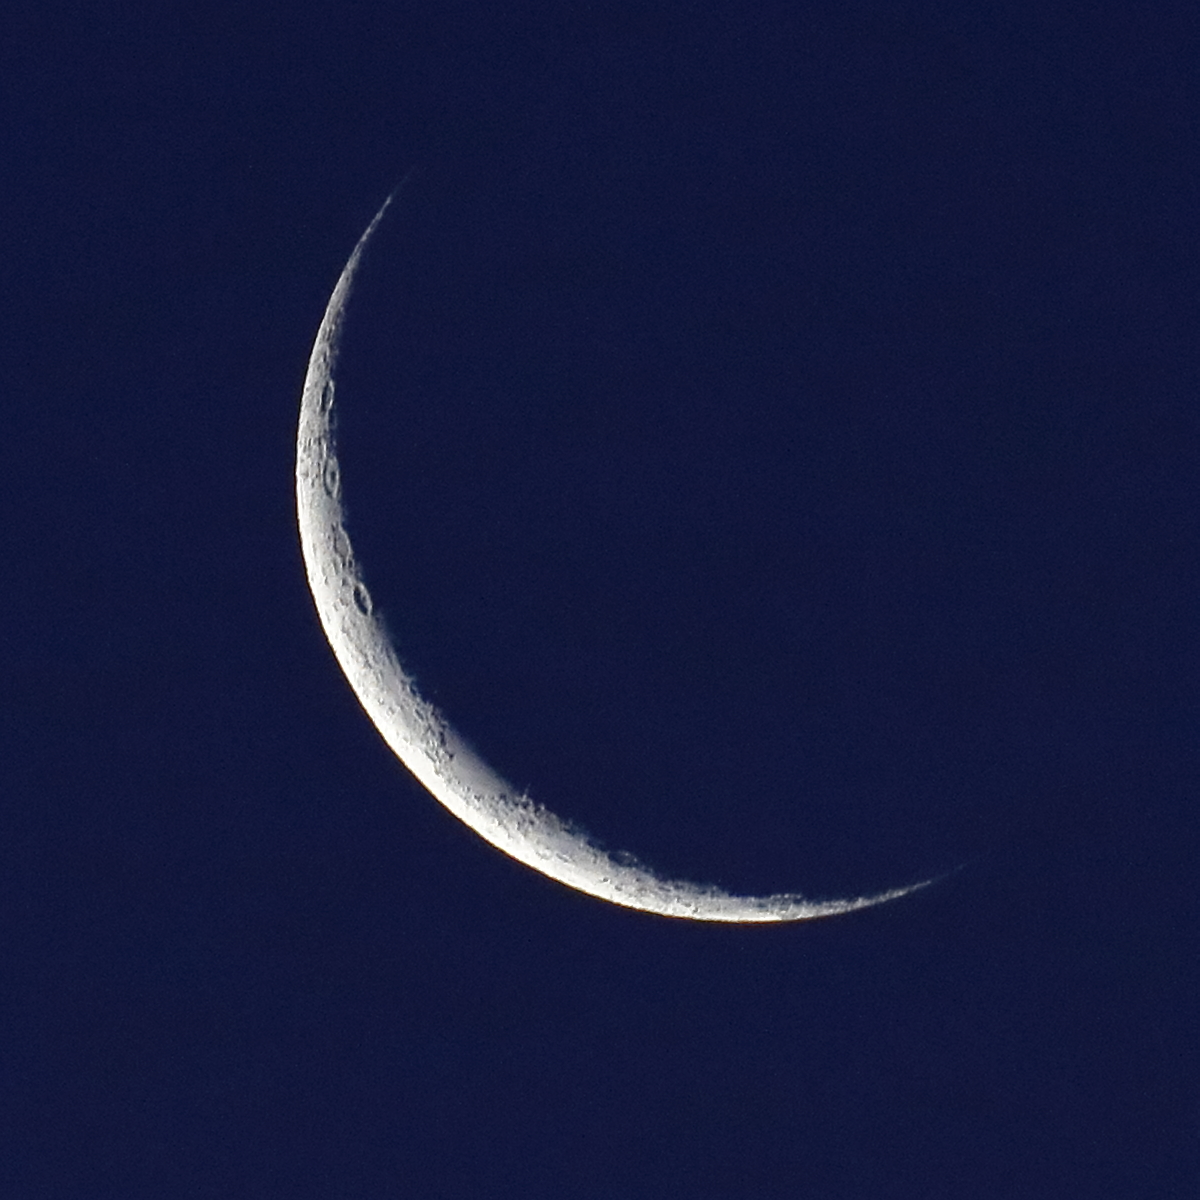 The first new moon of the year - a start of Chinese New Year